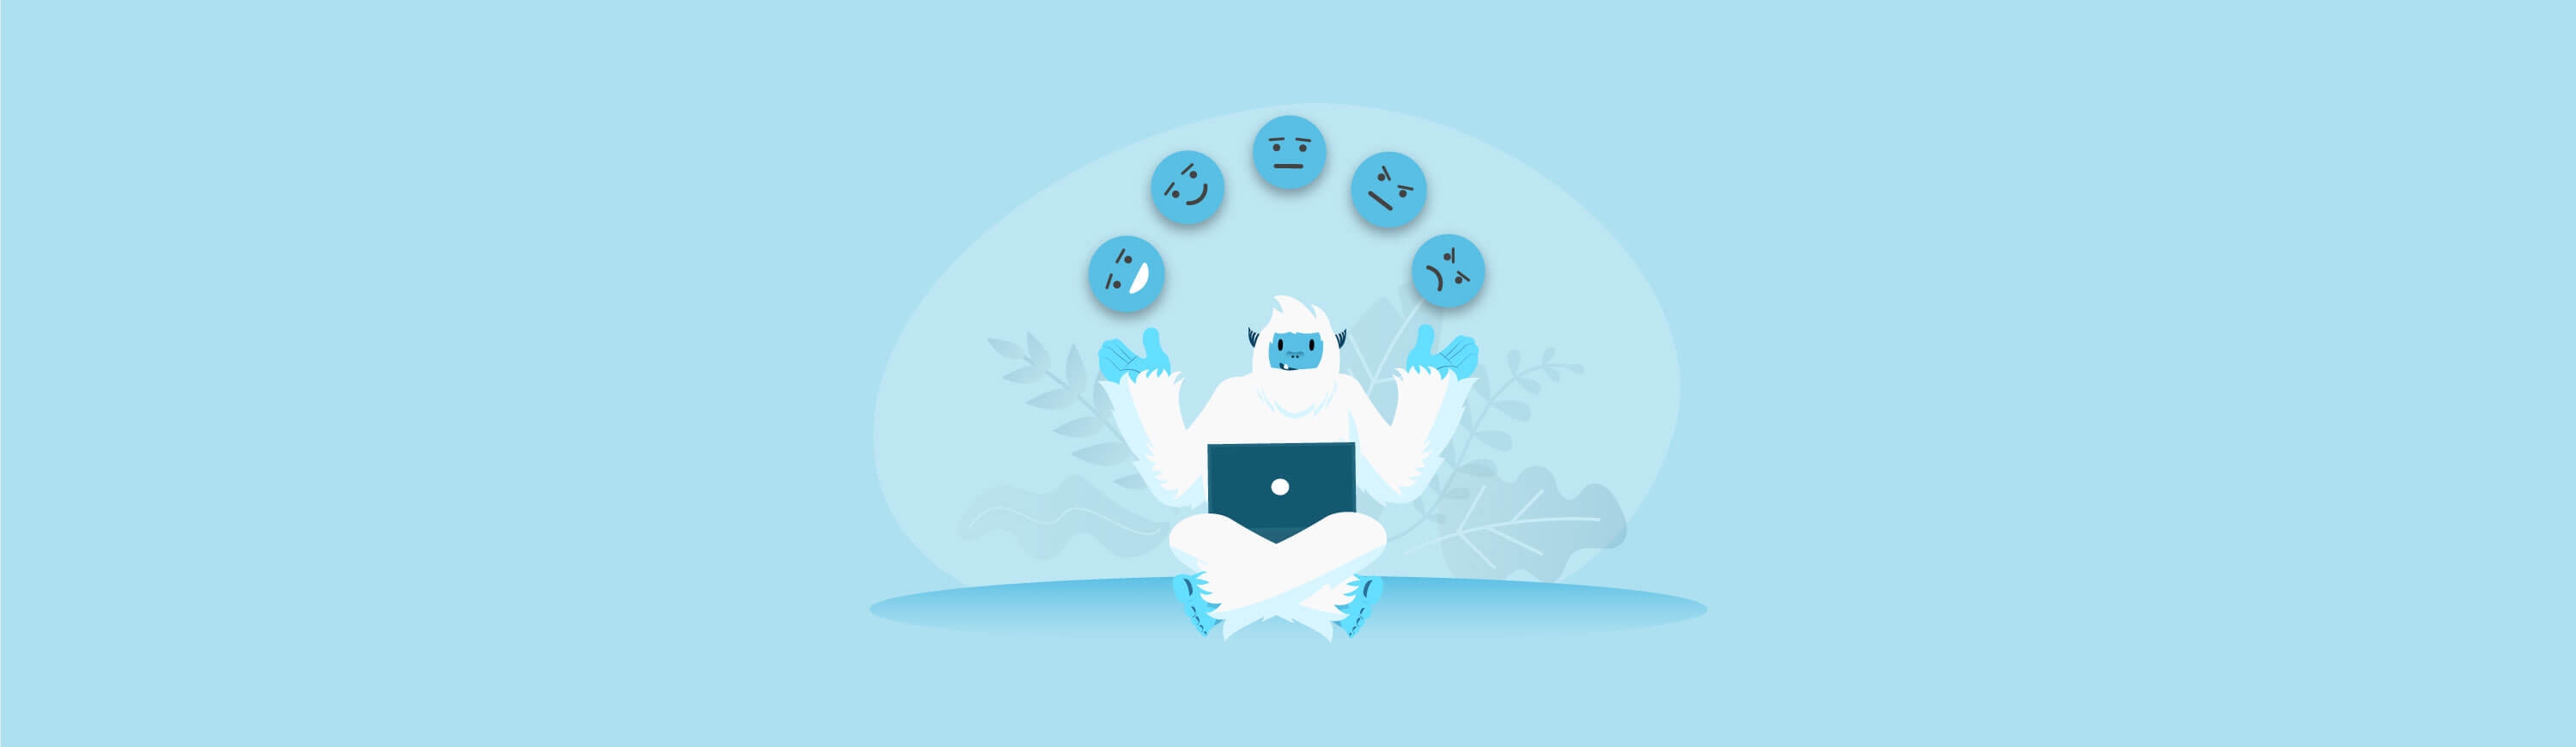 Illustration of a Carl the Yeti on a laptop with smiley faces floating above him.